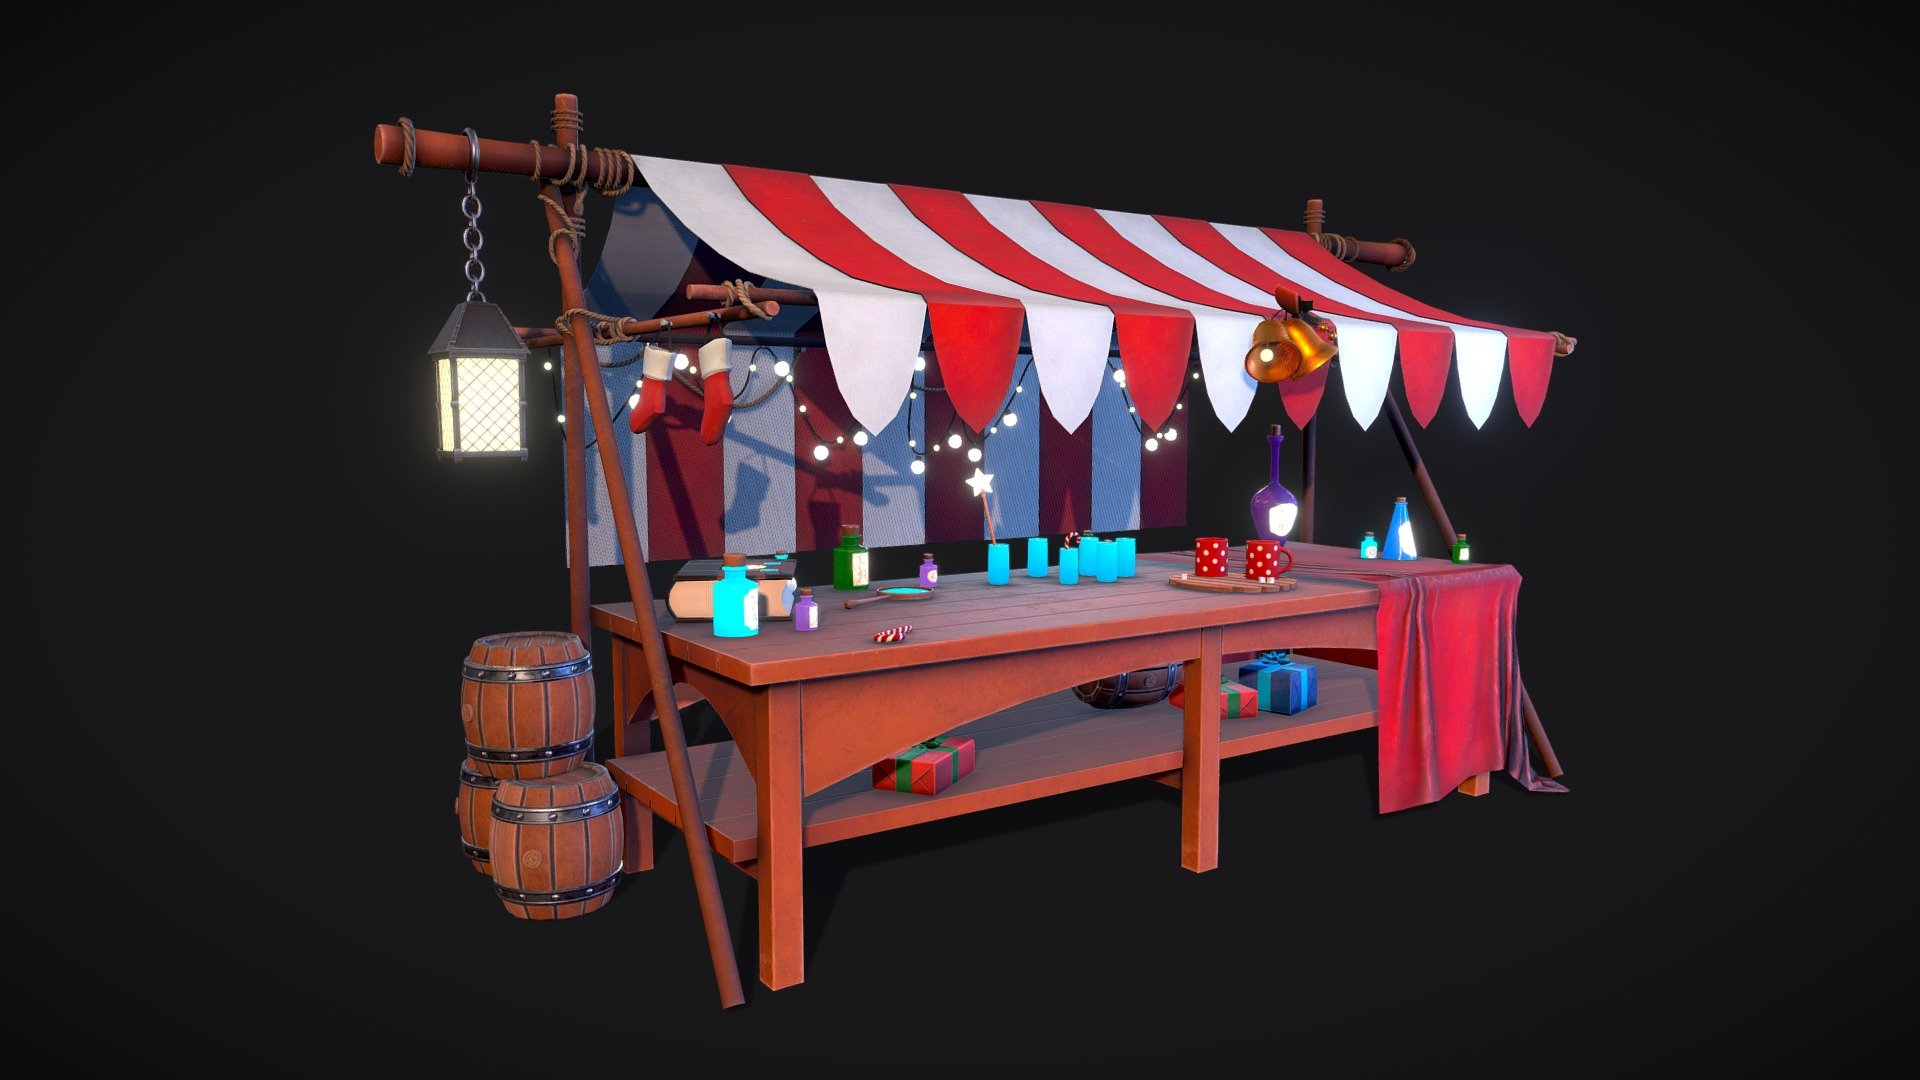 Christmas Market Stall game-ready model with optimized low-poly. 
PBR Metal-Roughness. 
Overlapping UVs.
Real-World Scale.

The archive contains following files:




.MA file (original MAYA file, version 2022)

FBX file

OBJ 

Texture set (available in 40964096 and 81928192)




Stall_BaseColor

Stall_Normal

Stall_Metalness

Stall_Roughness

Stall_Emissive

Stall_AO

If you have any additional questions or any problems related to the model, kindly contact me: katy.b2802@gmail.com - Christmas Market Stall - Buy Royalty Free 3D model by Enkarra 3d model